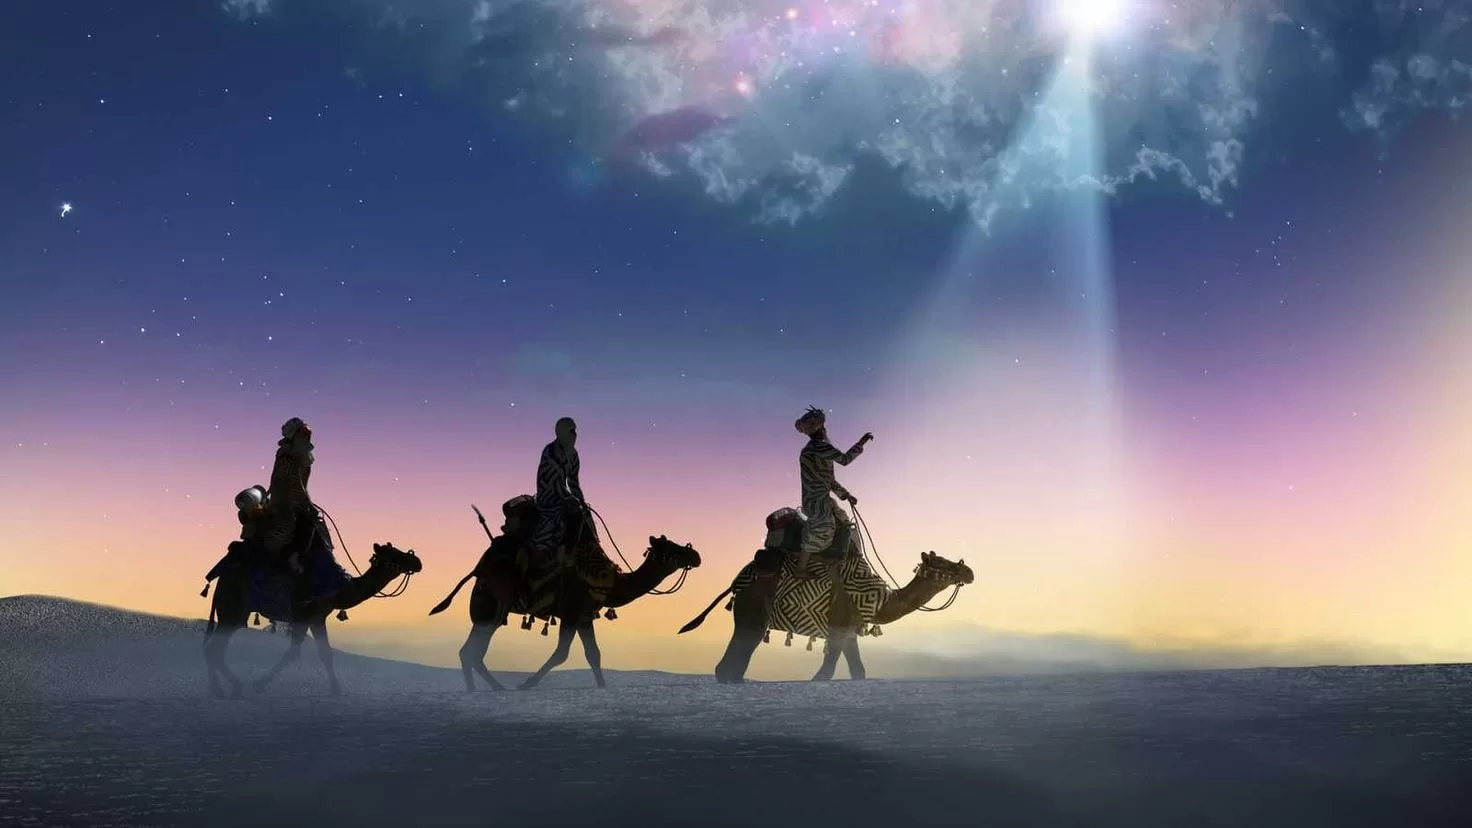 Where do the Three Wise Men come from and what is the origin of their Eastern Majesties?
